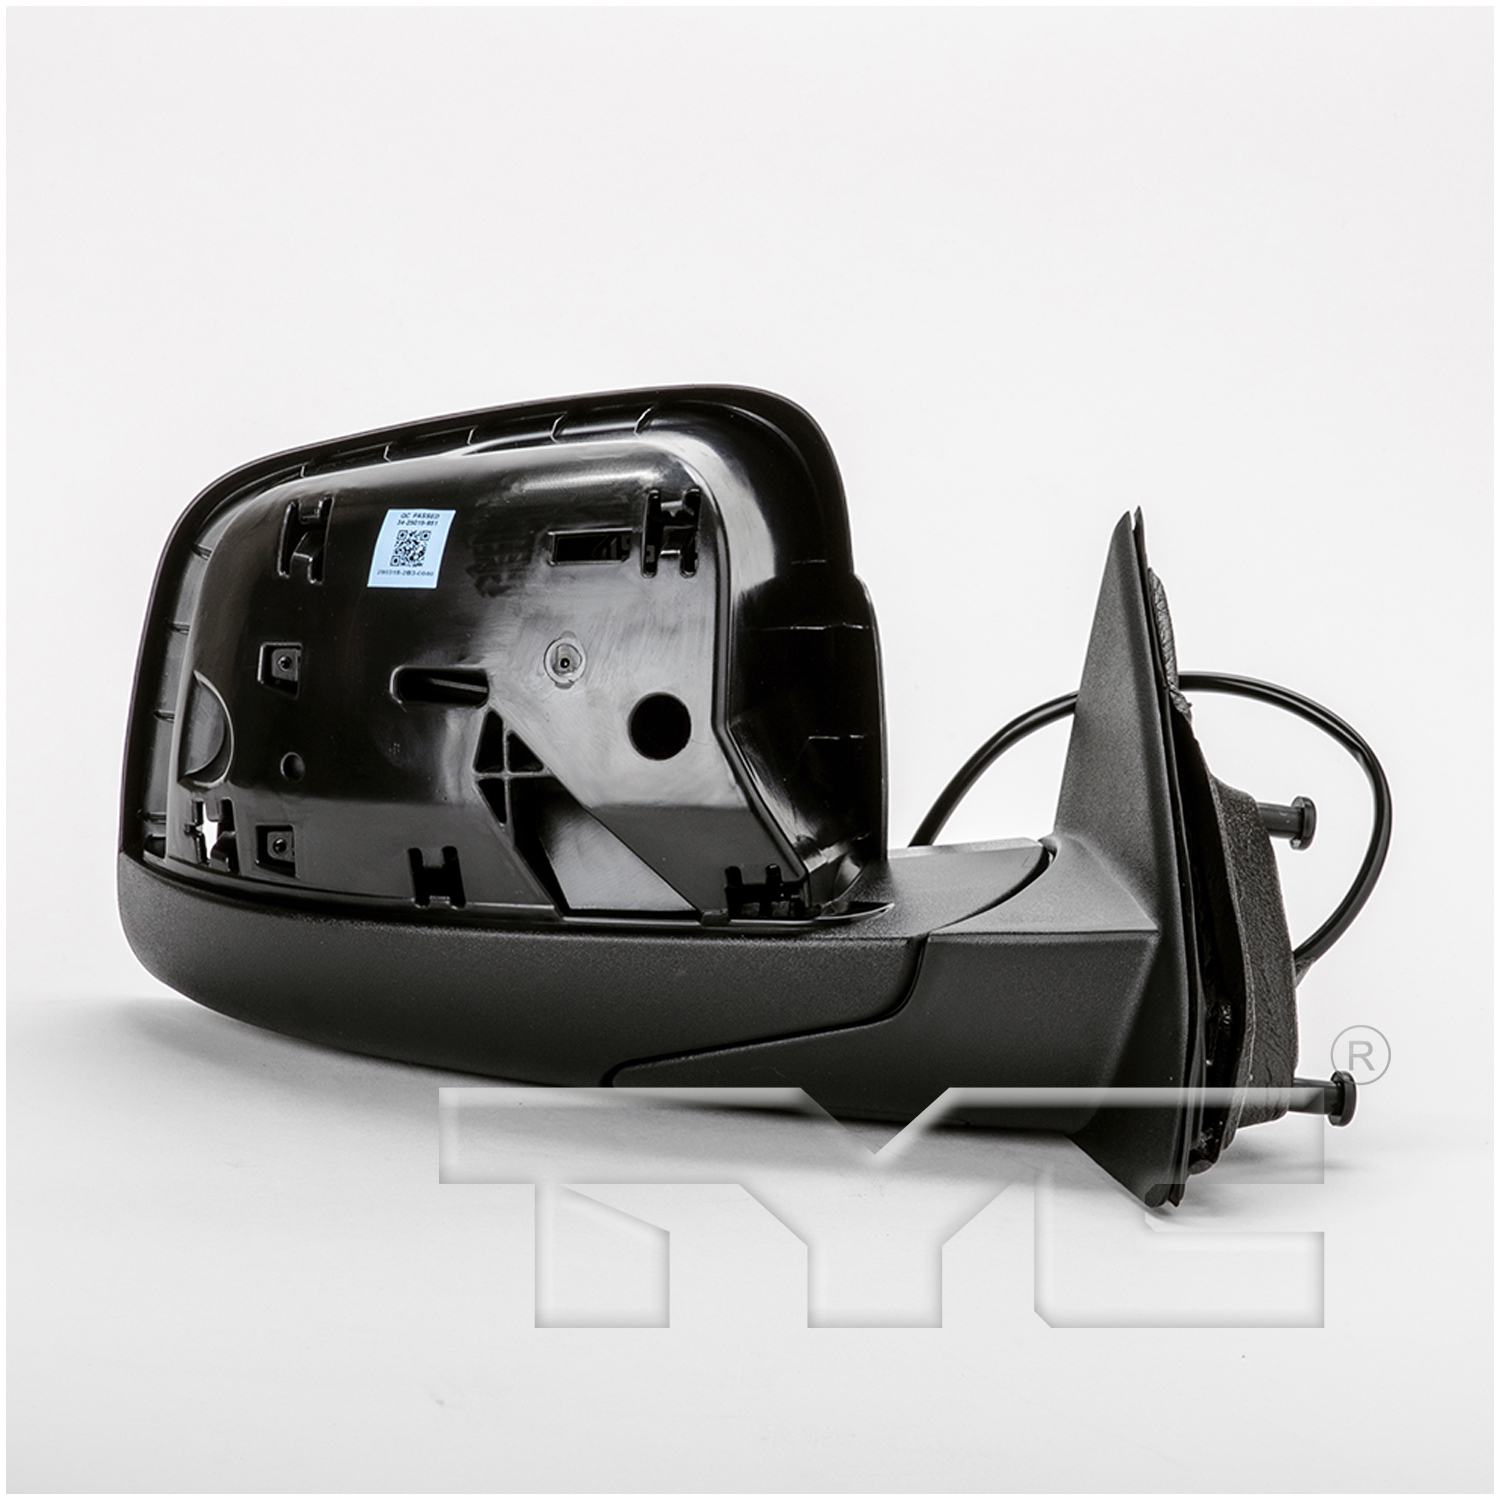 Aftermarket MIRRORS for JEEP - GRAND CHEROKEE, GRAND CHEROKEE,11-15,RT Mirror outside rear view